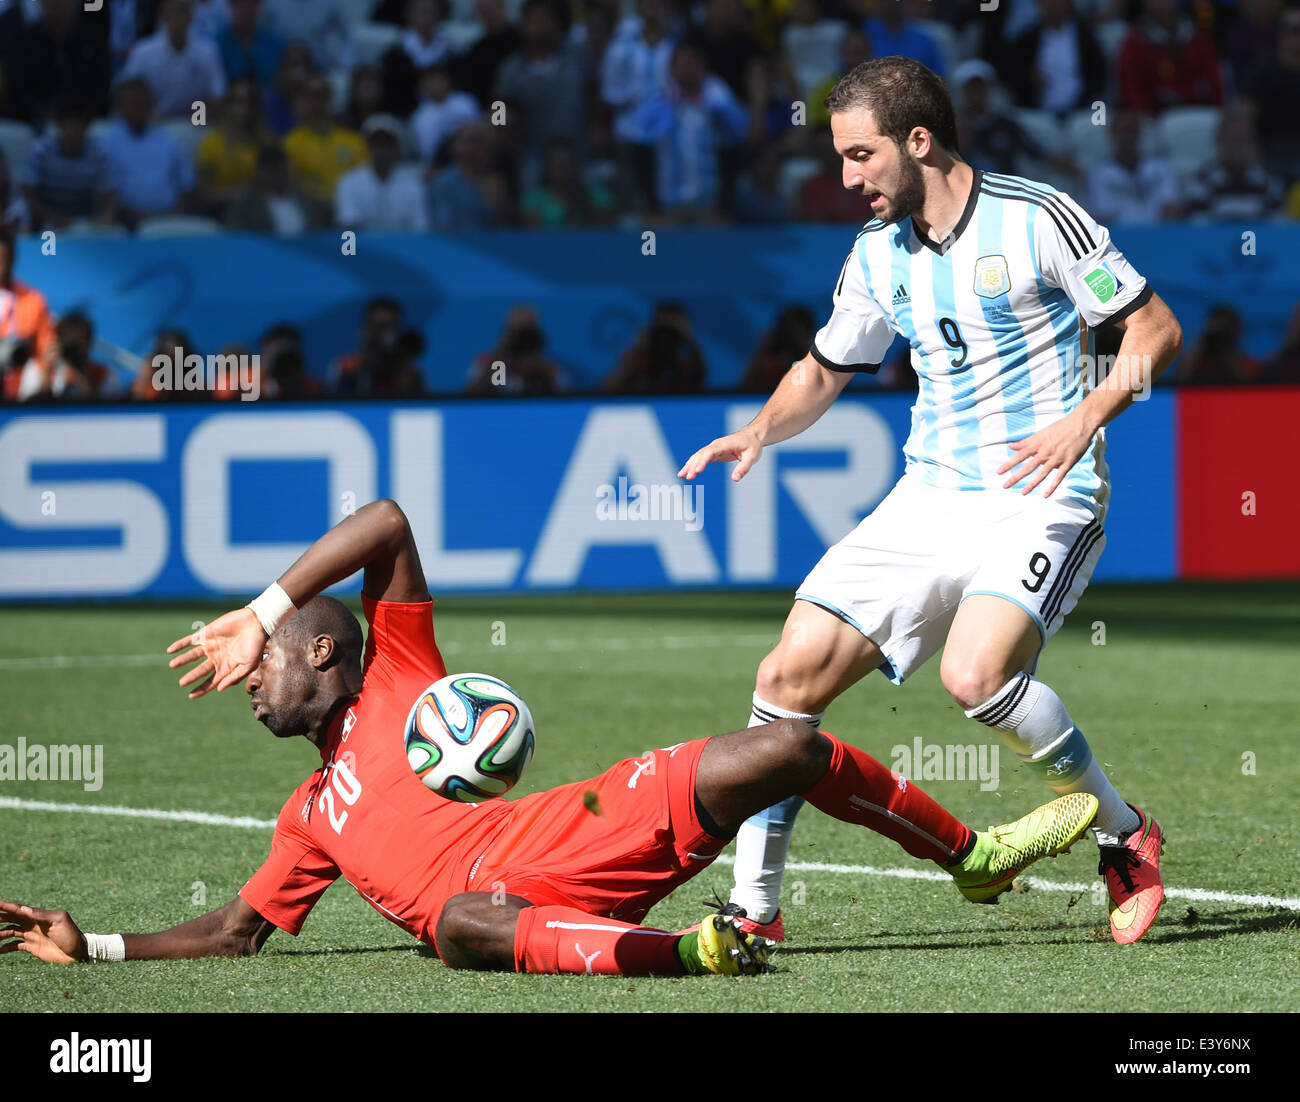 Sao Paulo, Brazil. 1st July, 2014. Argentina's Gonzalo Higuain vies with Switzerland's Johan Djourou during a Round of 16 match between Argentina and Switzerland of 2014 FIFA World Cup at the Arena de Sao Paulo Stadium in Sao Paulo, Brazil, on July 1, 2014. Credit:  Wang Yuguo/Xinhua/Alamy Live News Stock Photo